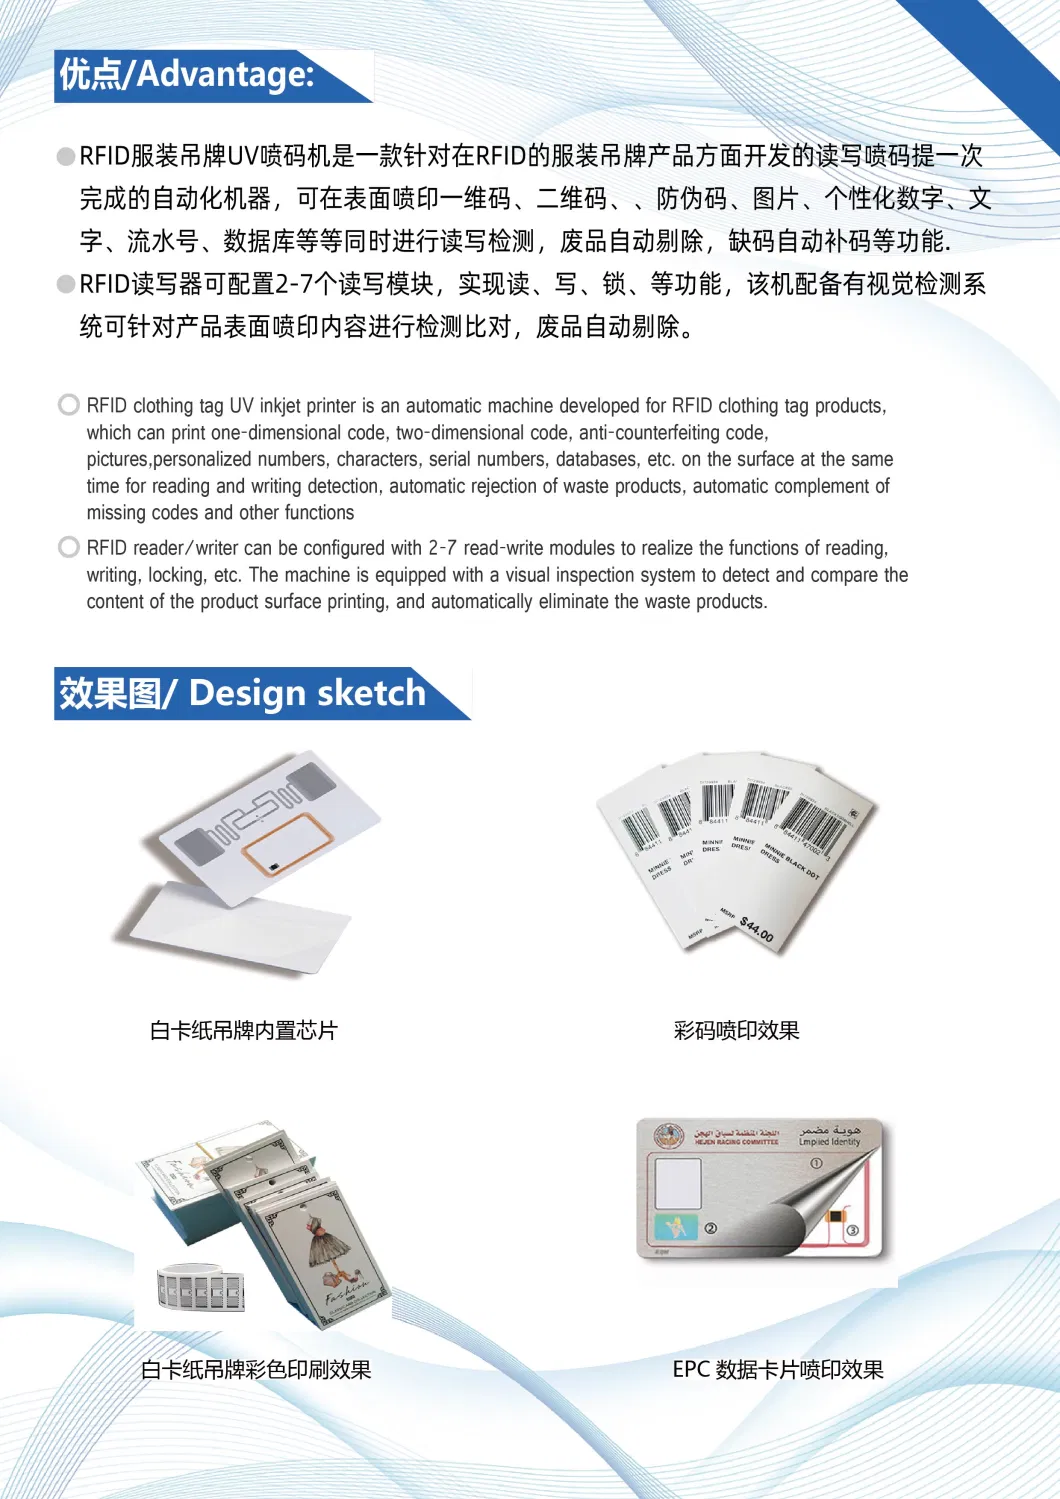 Automatic RFID Clothing Tag Printing Machine for Reading and Writing Code